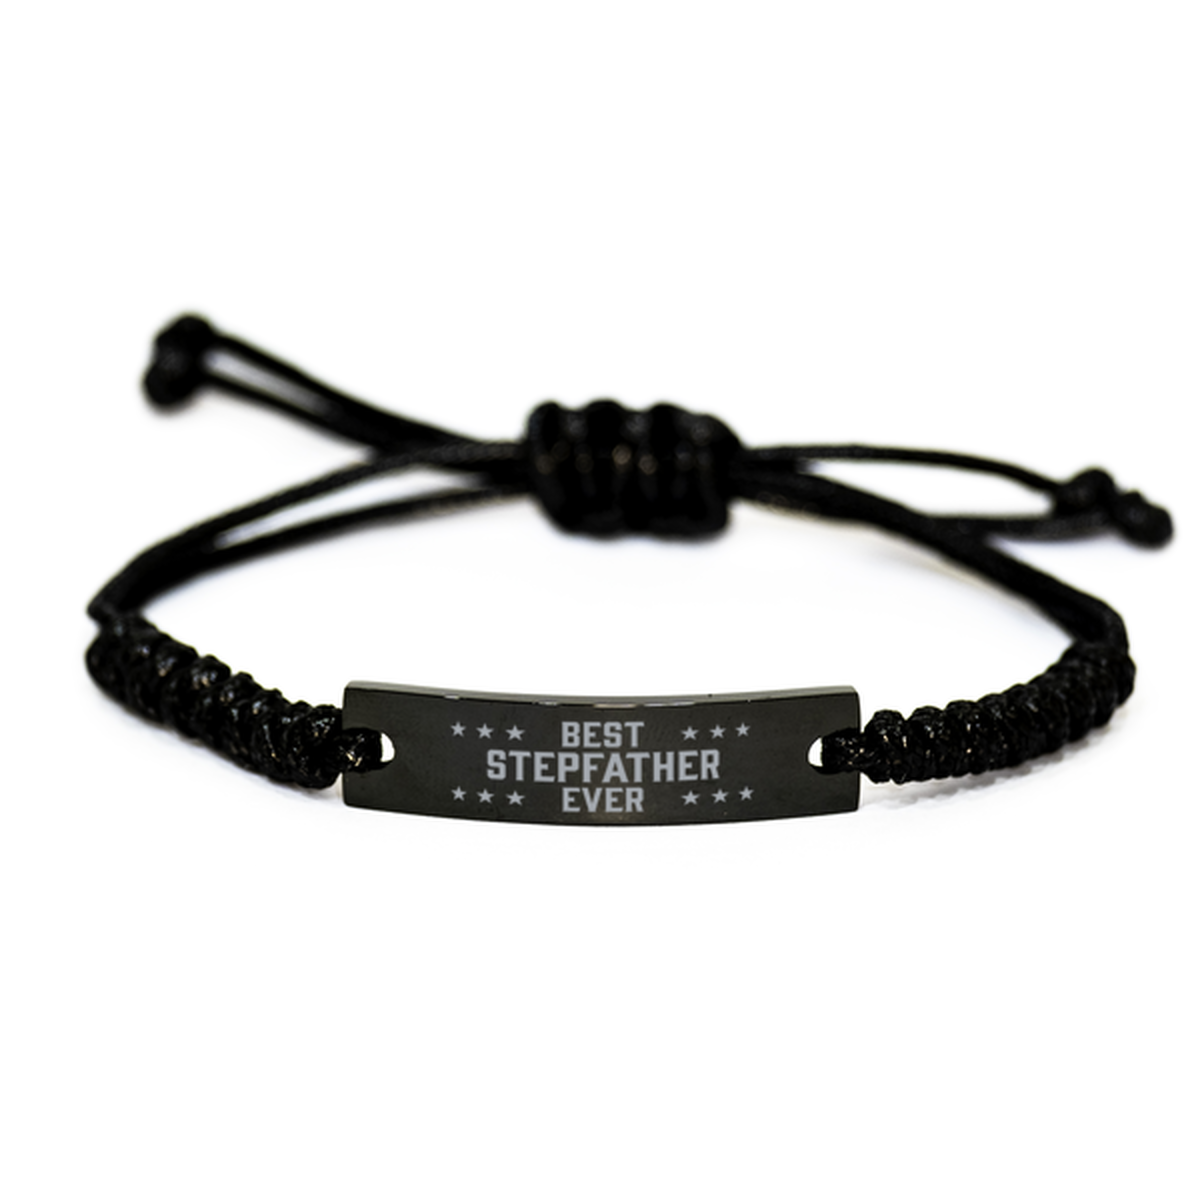 Best Stepfather Ever Stepfather Gifts, Funny Engraved Rope Bracelet For Stepfather, Birthday Family Gifts For Men